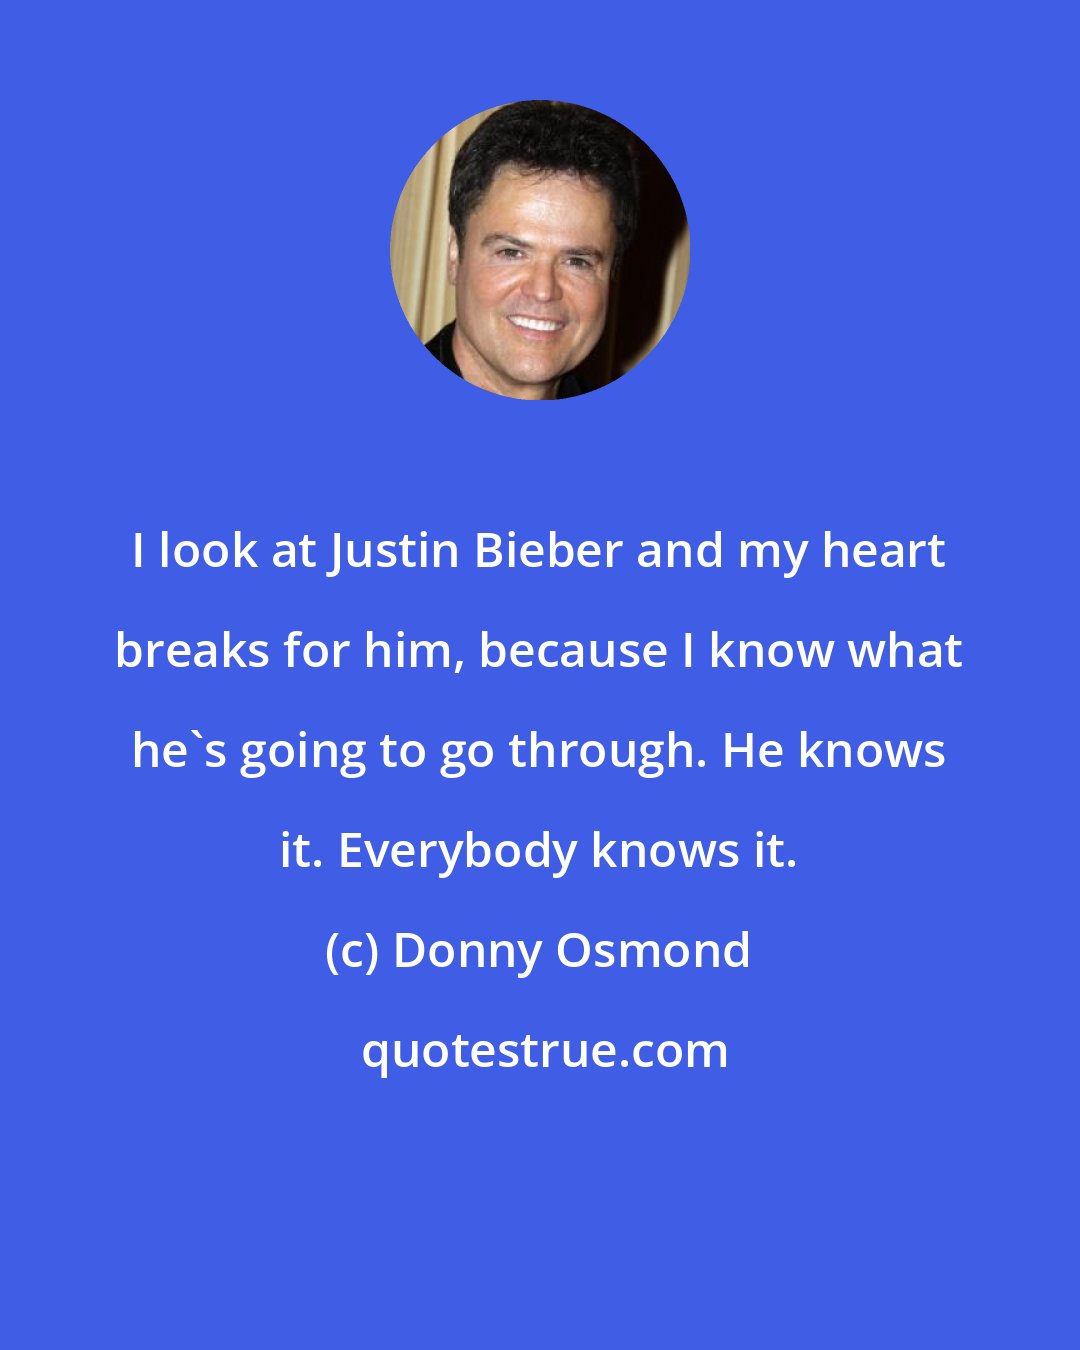 Donny Osmond: I look at Justin Bieber and my heart breaks for him, because I know what he's going to go through. He knows it. Everybody knows it.